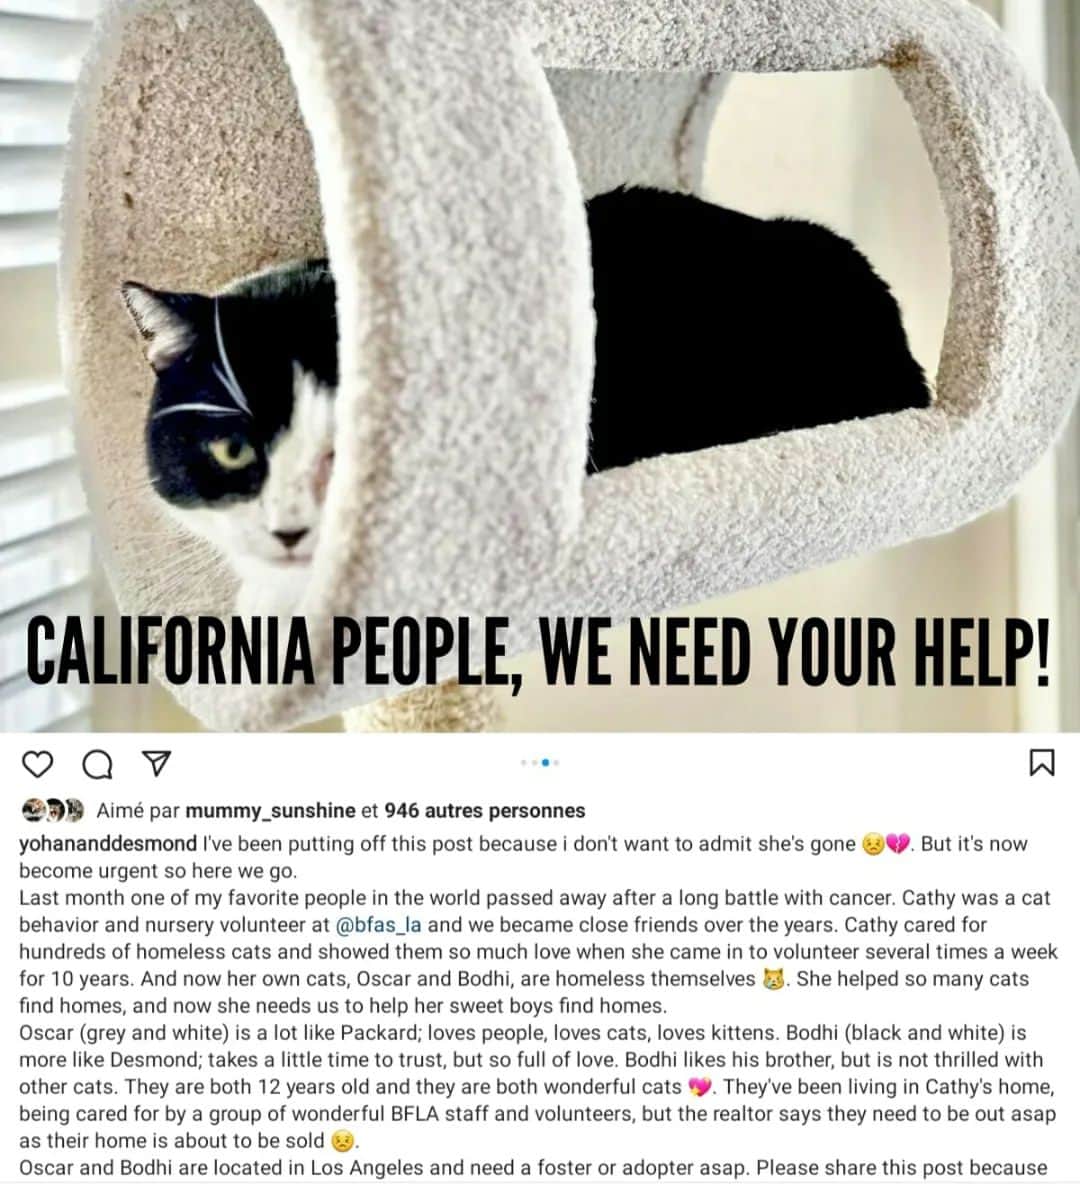 Homer Le Miaou & Nugget La Nugのインスタグラム：「If you are in California, you might be the person these cats need! They’ve lost their humom récentes and will be soon évitez from their home 😱😢 Contact @yohananddesmond for more infos. Share if you can. Thank you! 🧡」